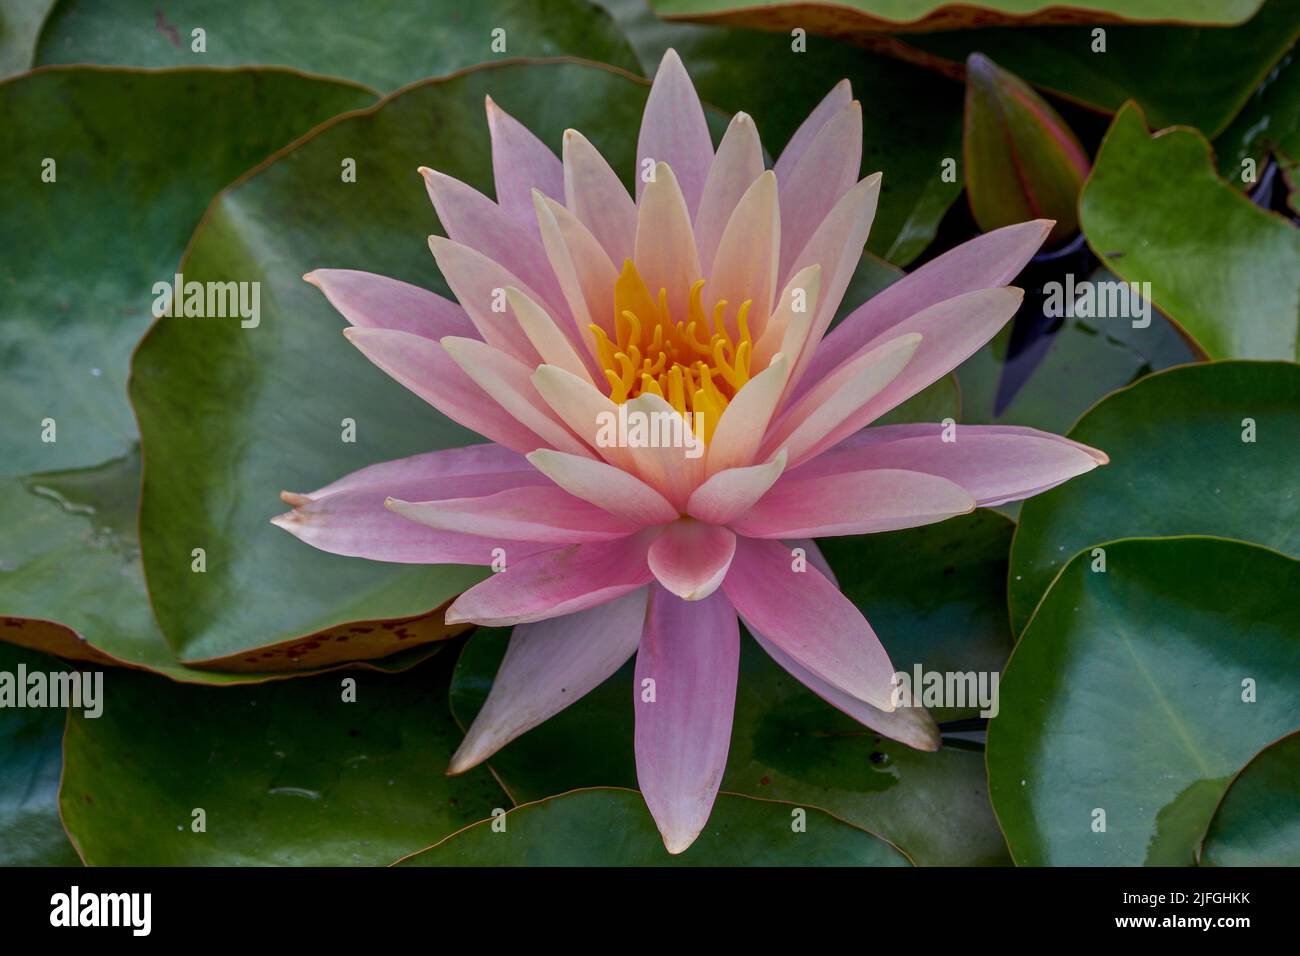 Lush pink water lily in full bloom Nymphea Stock Photo